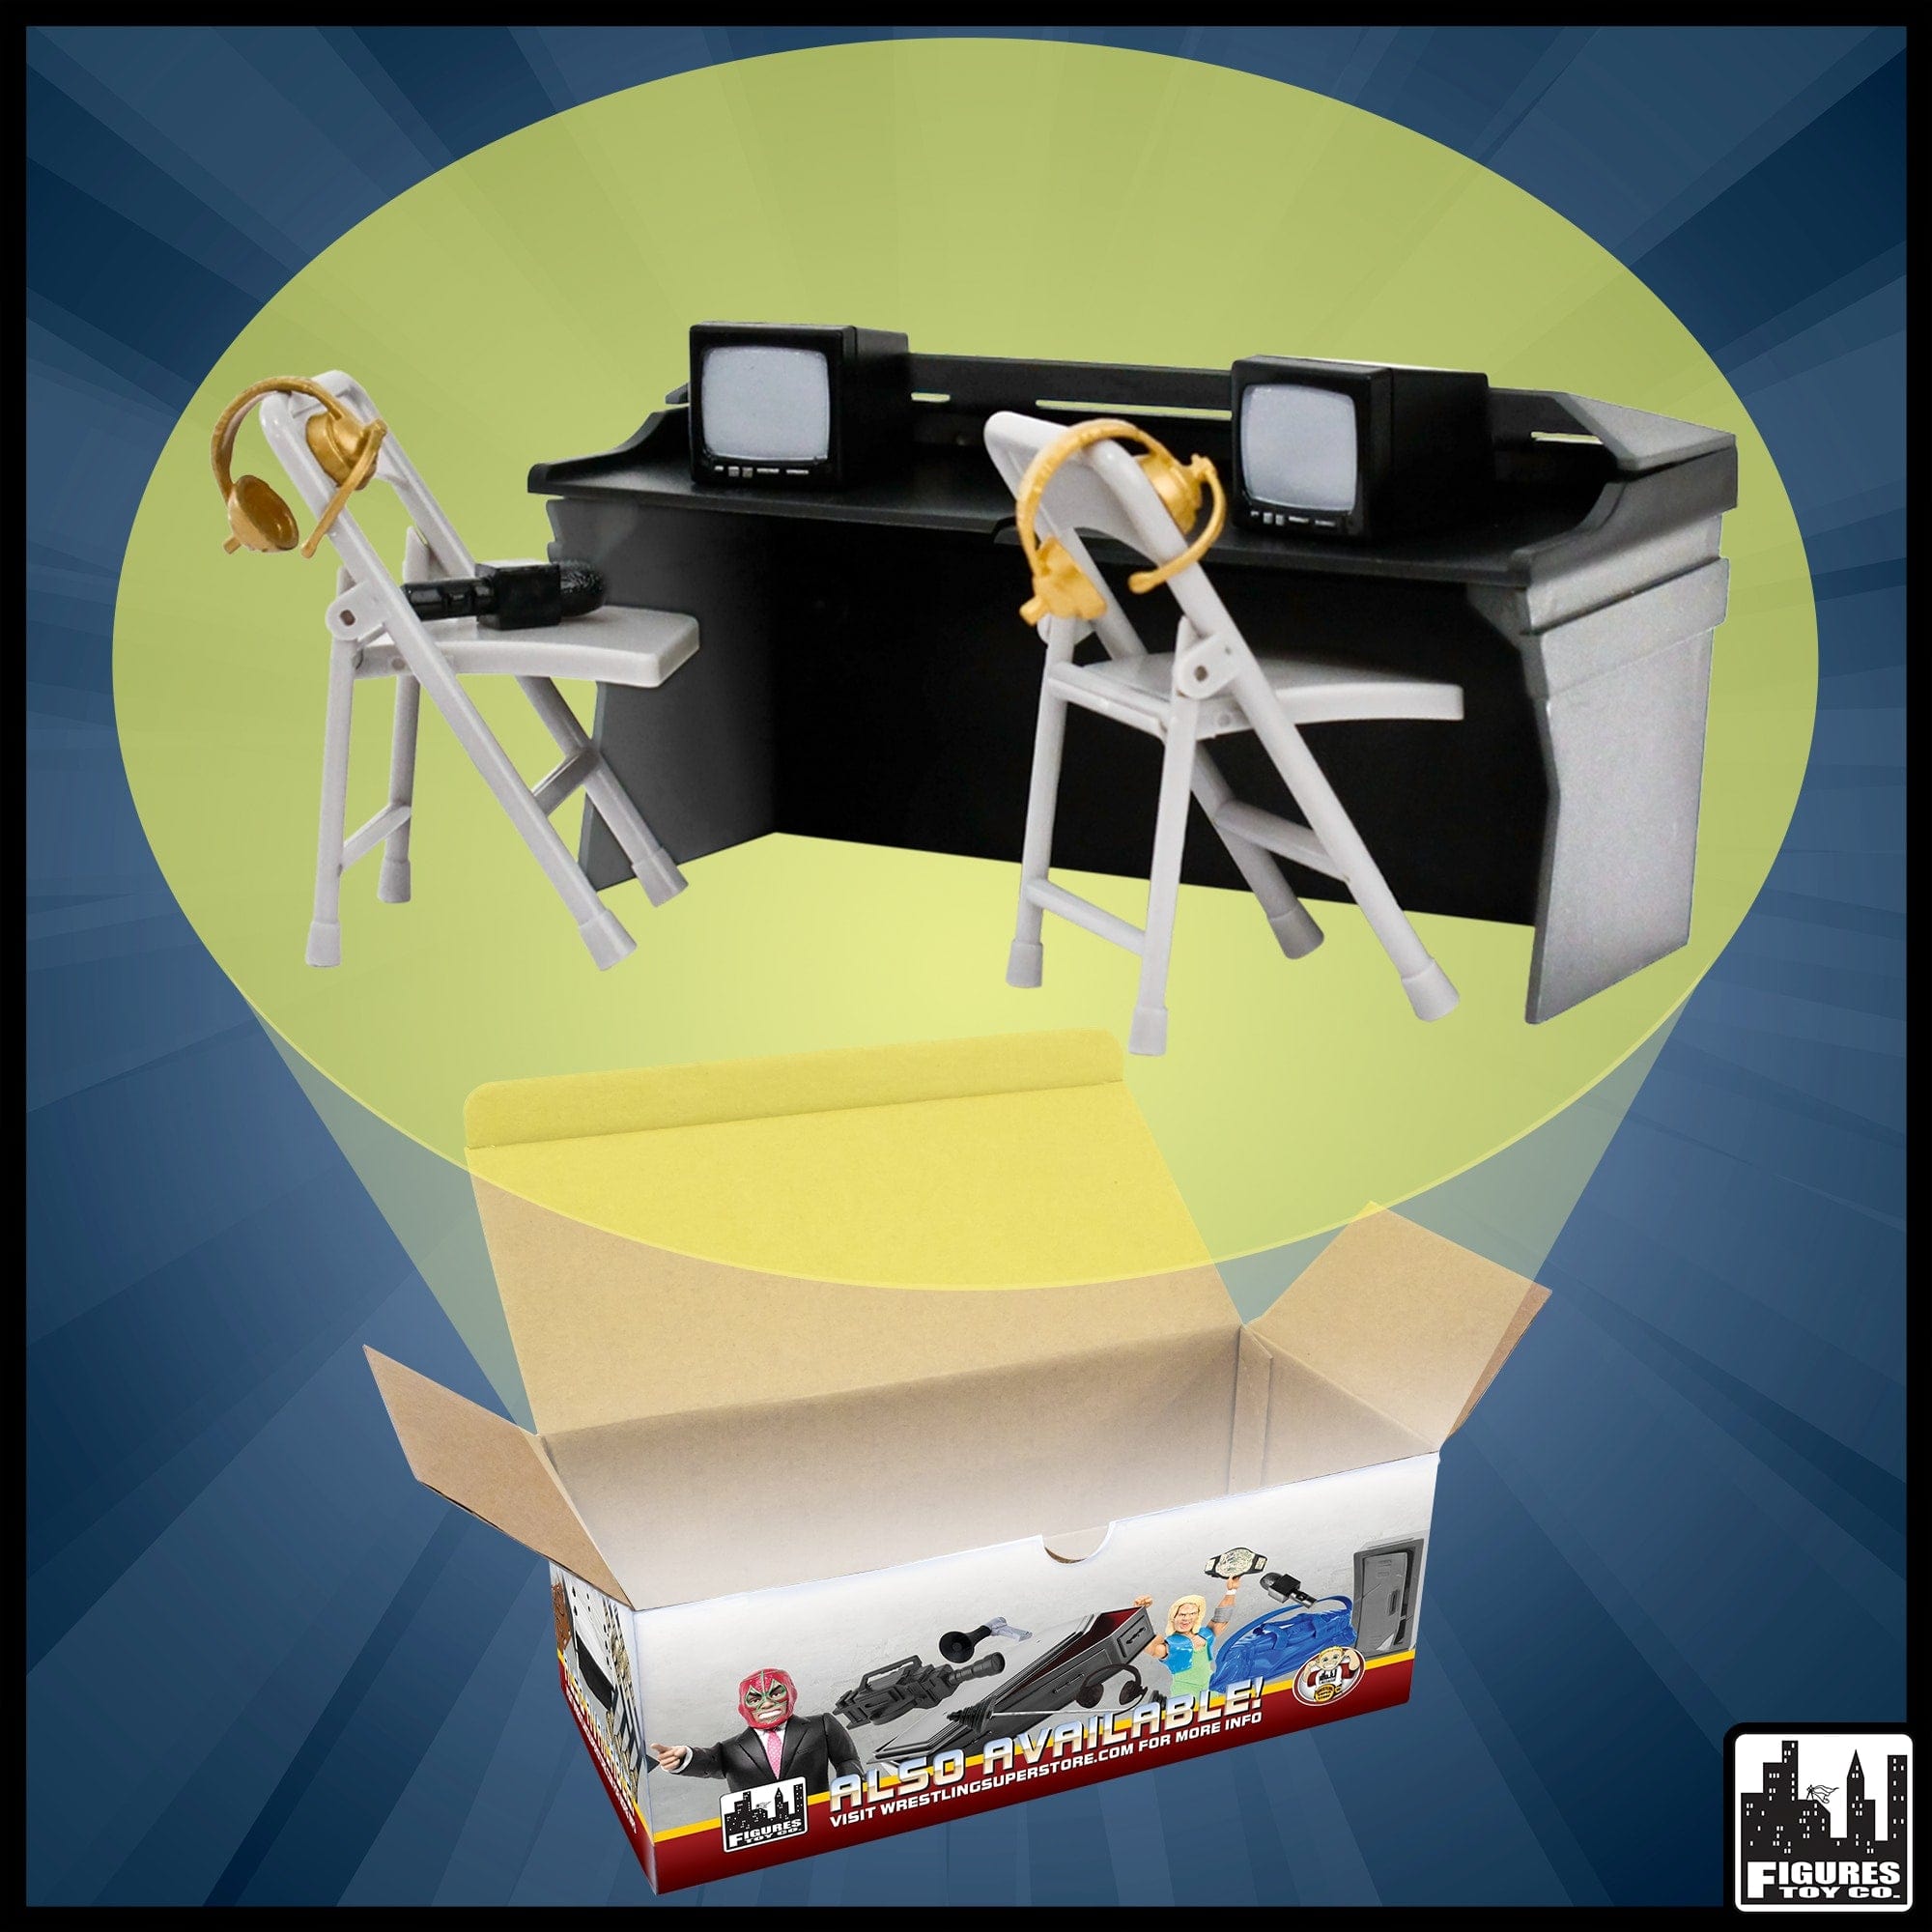 Black & Gray Commentator Table Playset For WWE Wrestling Action Figures